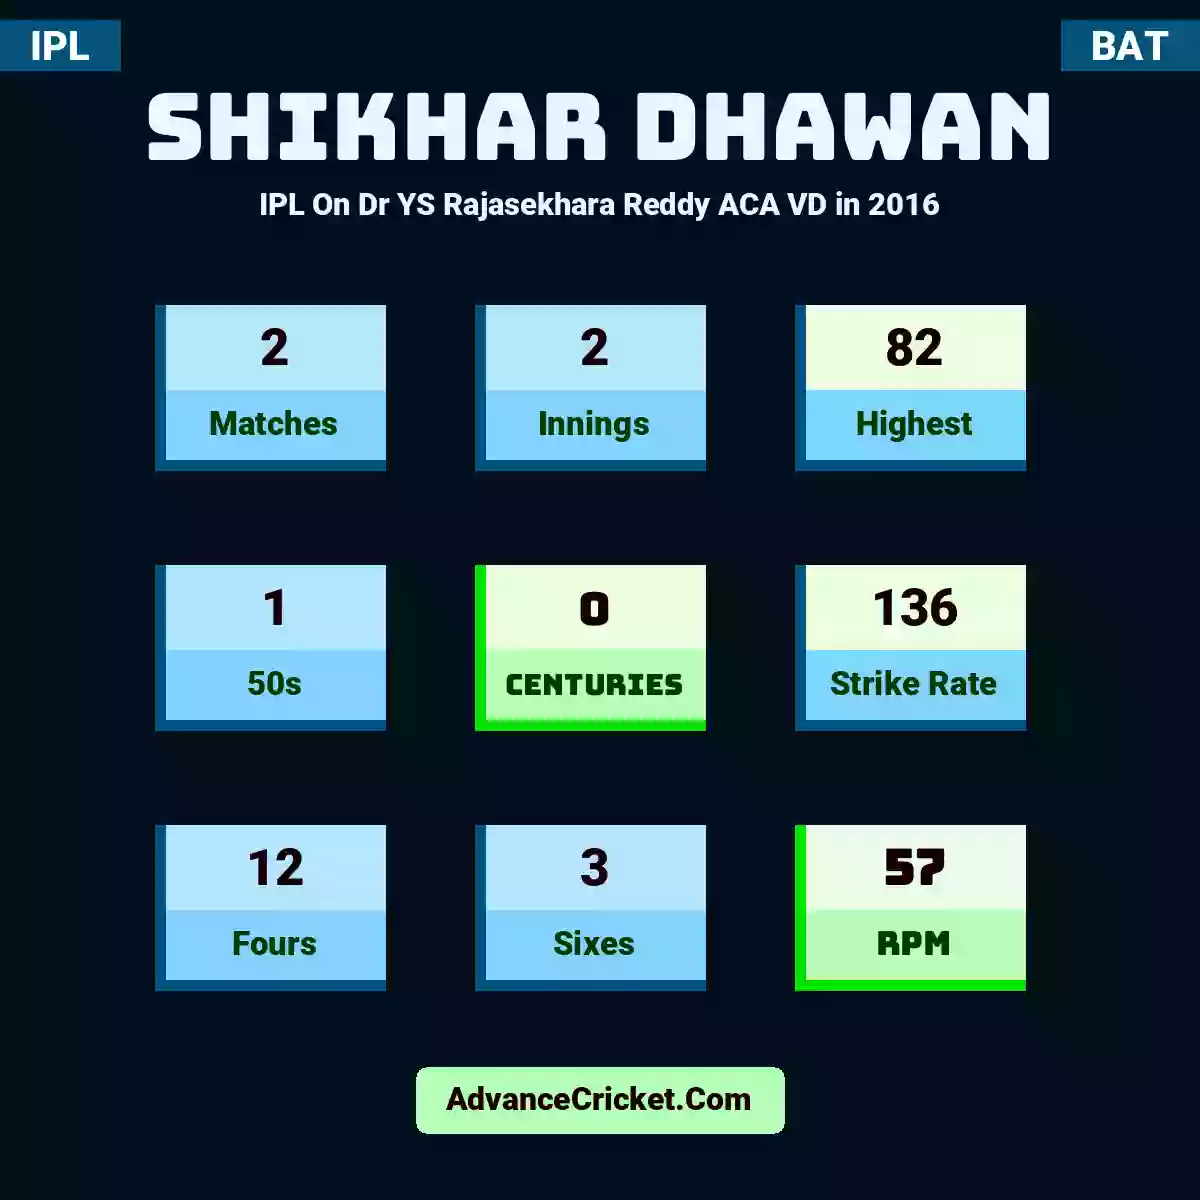 Shikhar Dhawan IPL  On Dr YS Rajasekhara Reddy ACA VD in 2016, Shikhar Dhawan played 2 matches, scored 82 runs as highest, 1 half-centuries, and 0 centuries, with a strike rate of 136. S.Dhawan hit 12 fours and 3 sixes, with an RPM of 57.